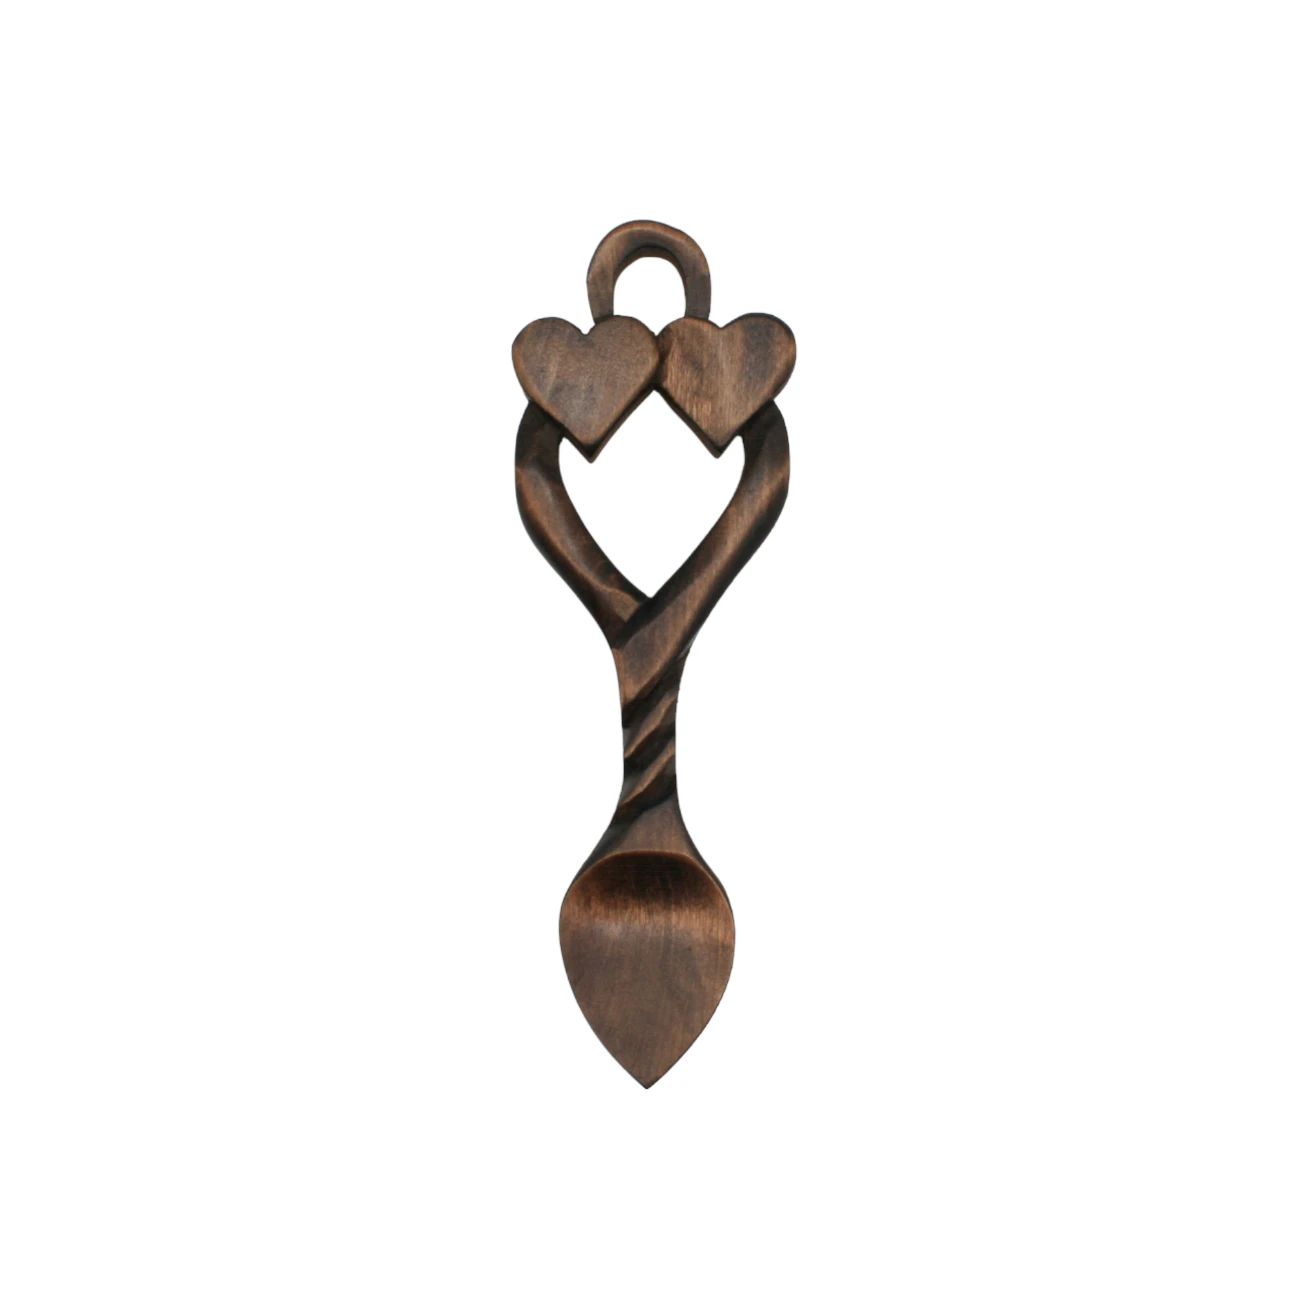 An image of a lovespoon titled Hearts & Twist